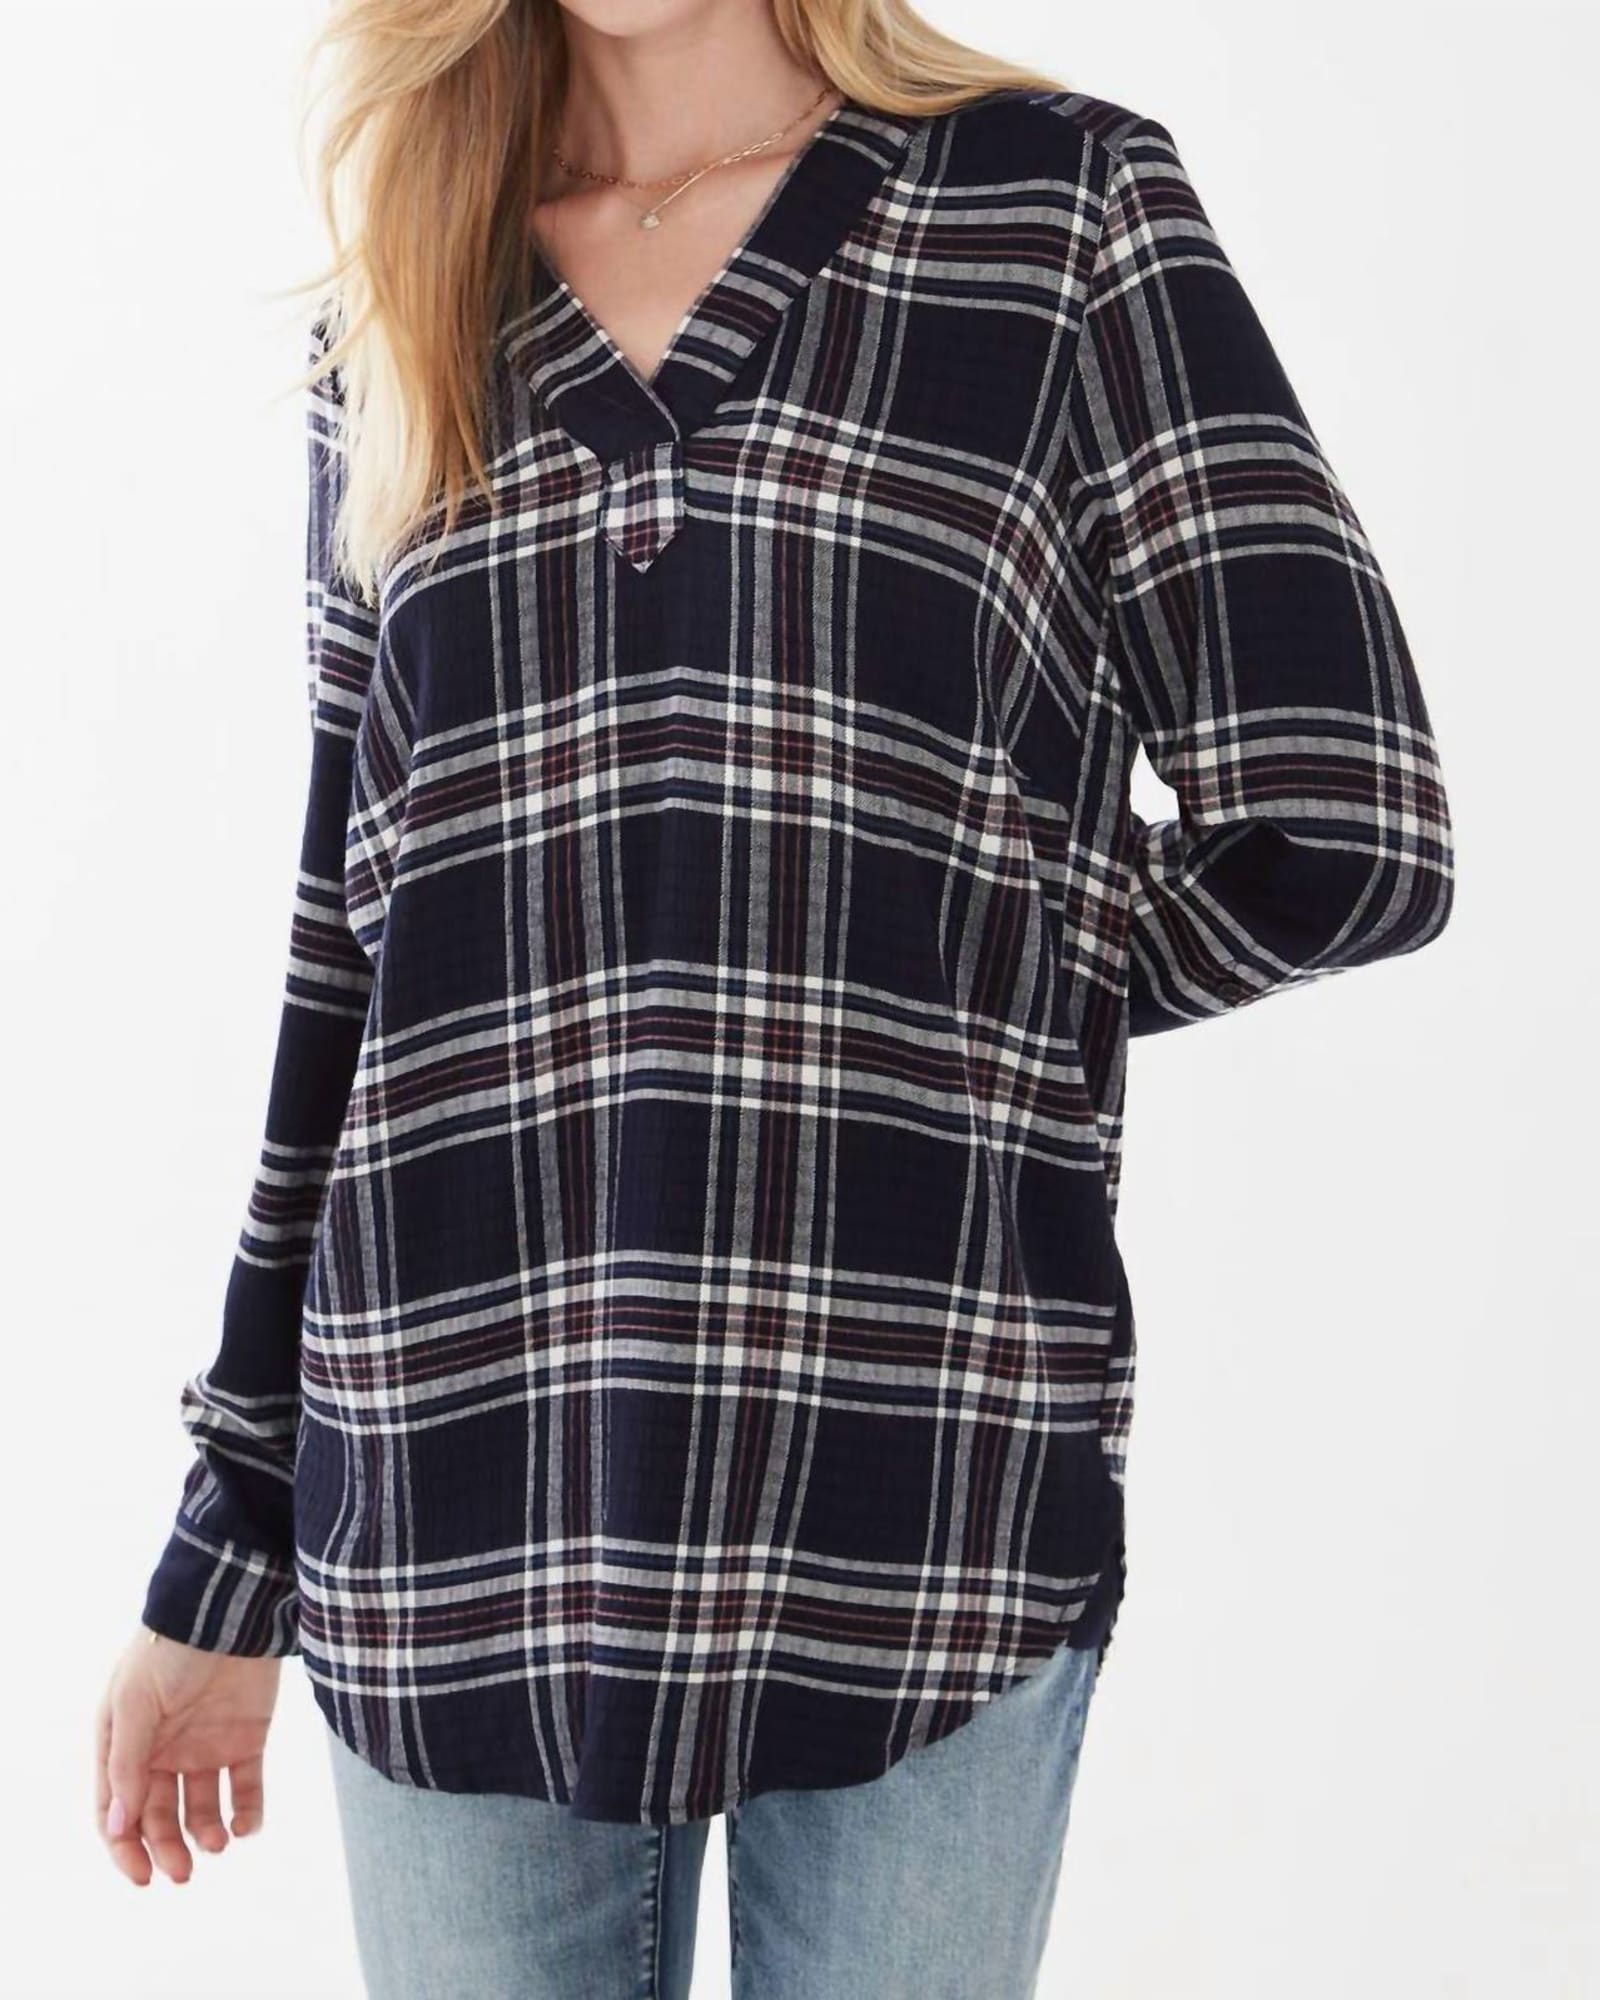 Popover Check Textured Tunic in Navy Plaid | Navy Plaid